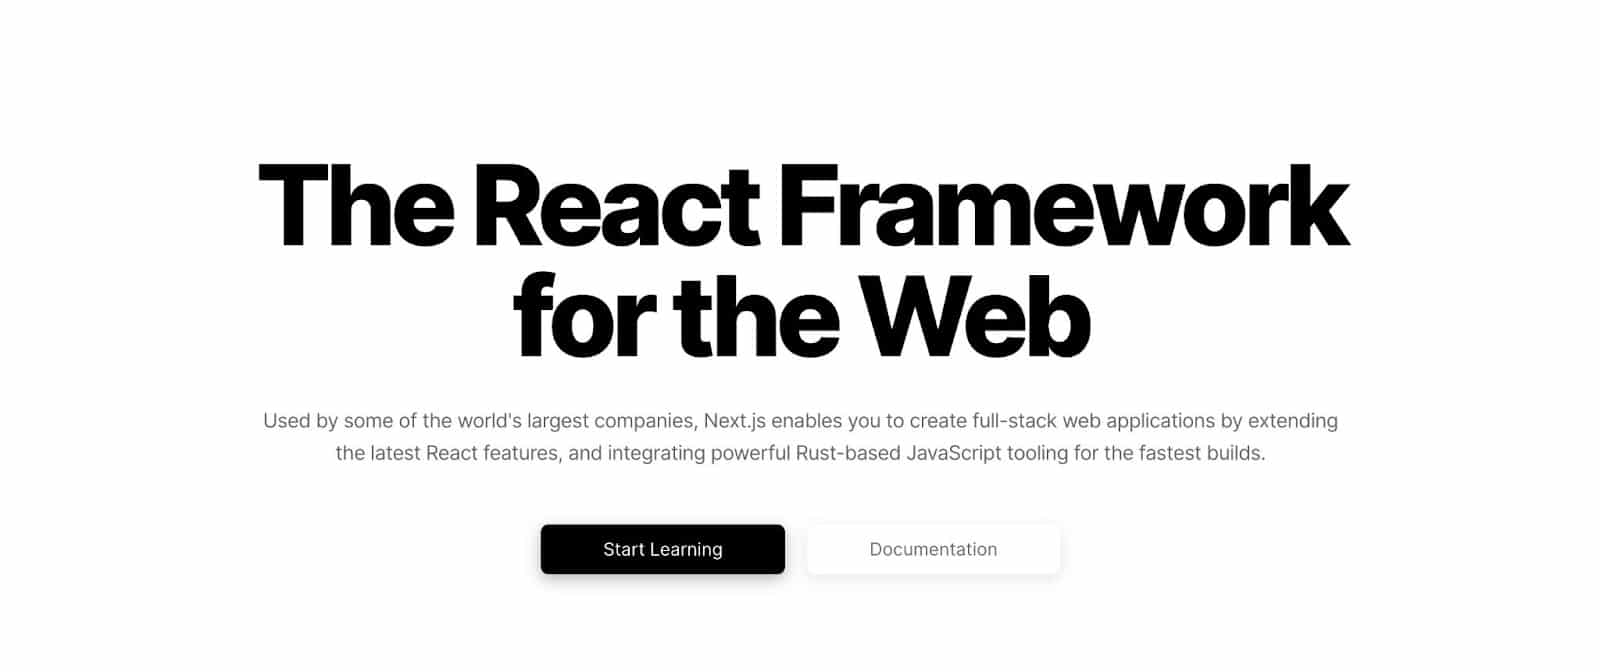 The Next.js website homepage